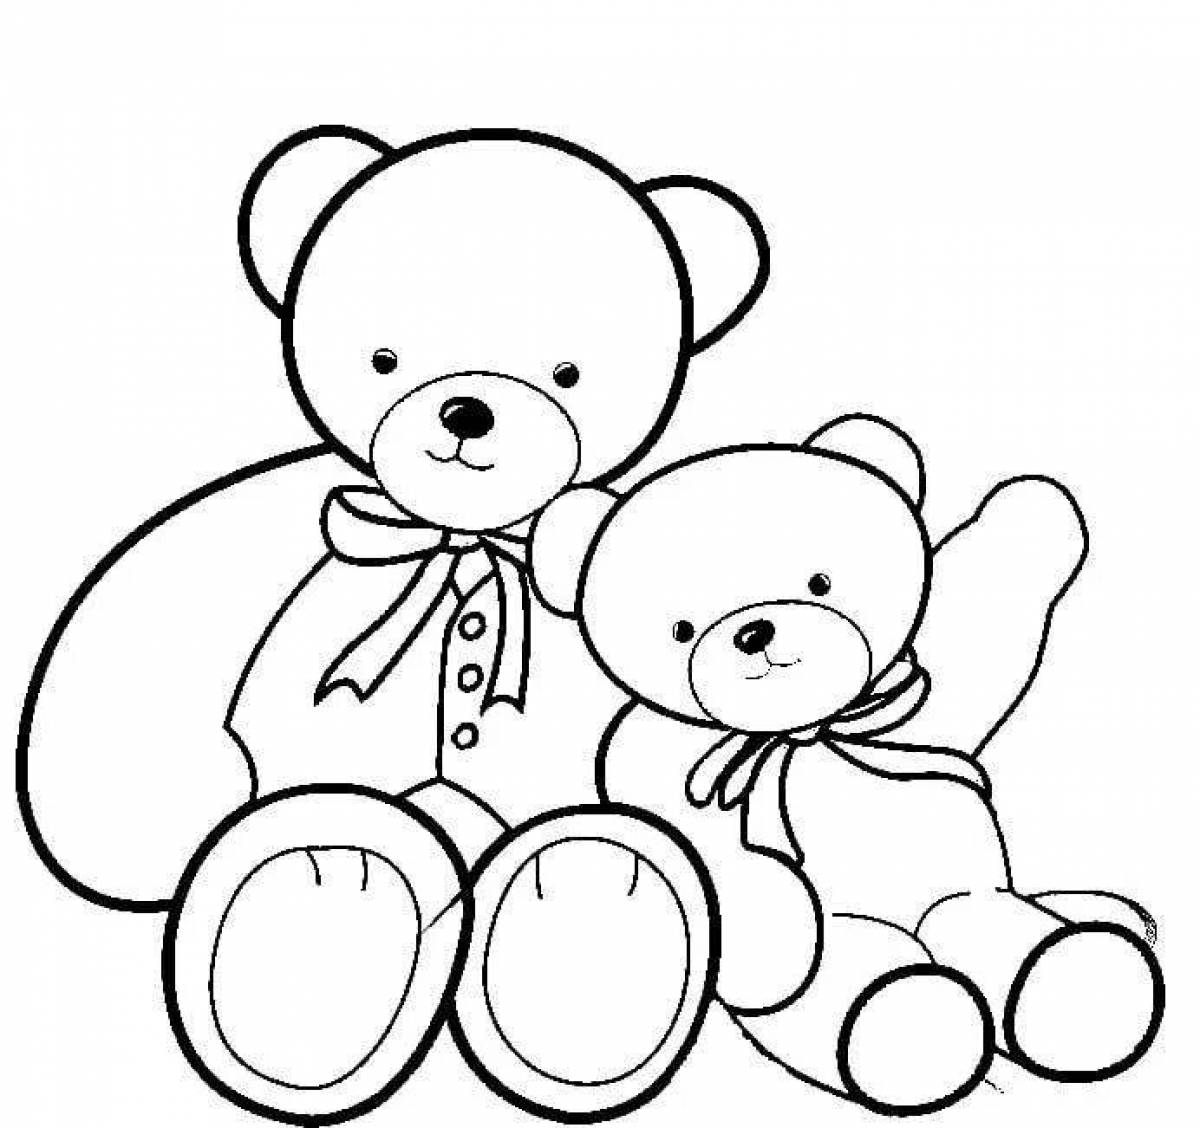 Glowing Teddy Bear coloring page